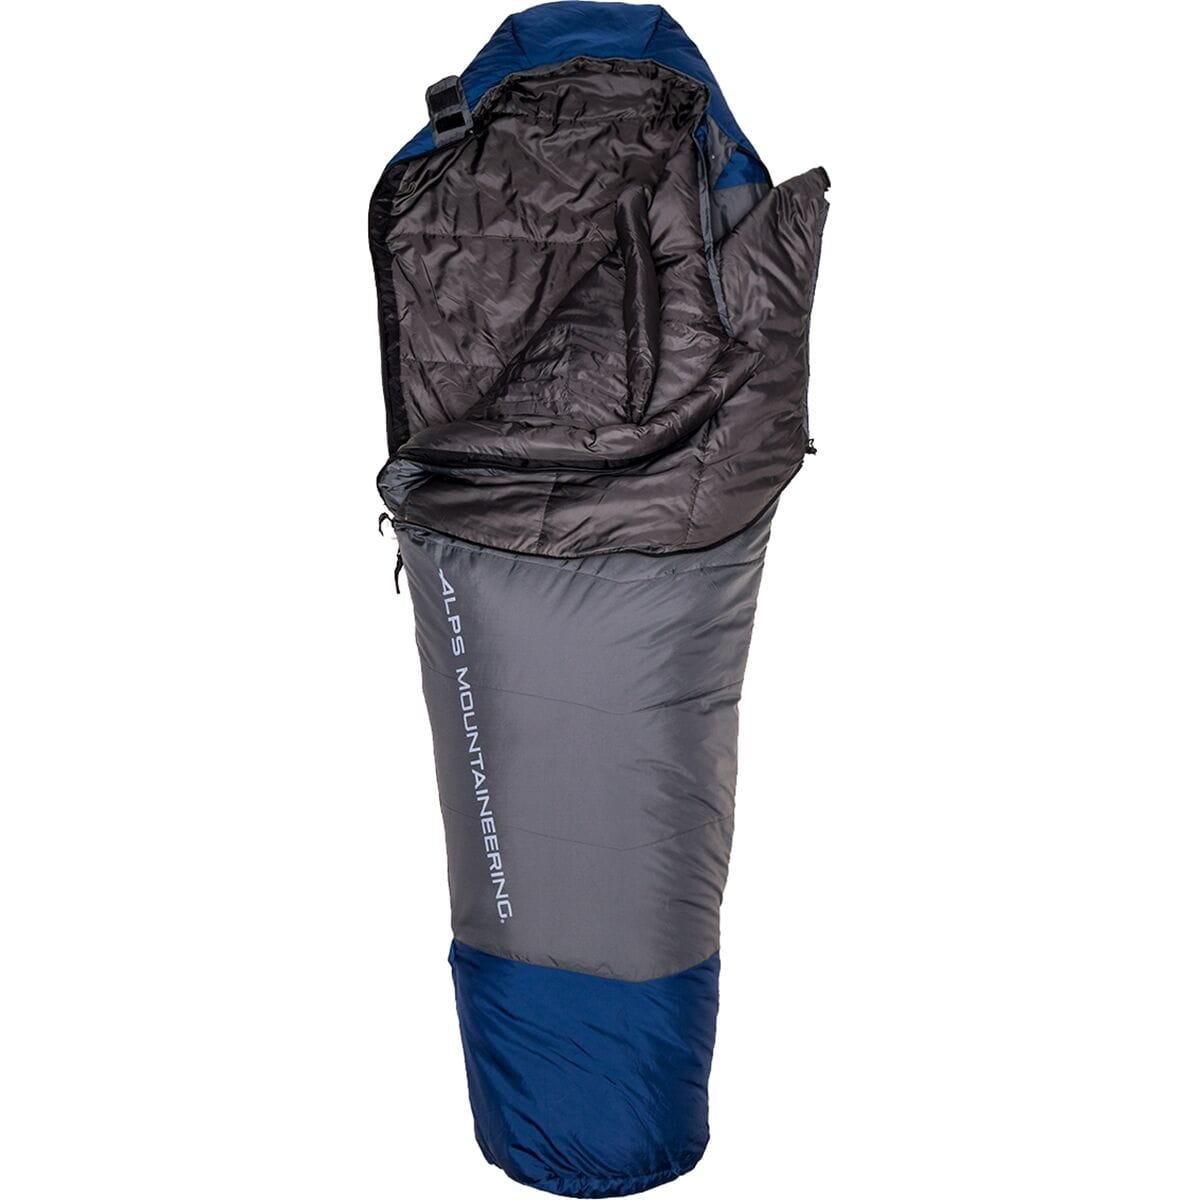 ALPS Mountaineering Lightning System Sleeping Bag: 30/15F Synthetic